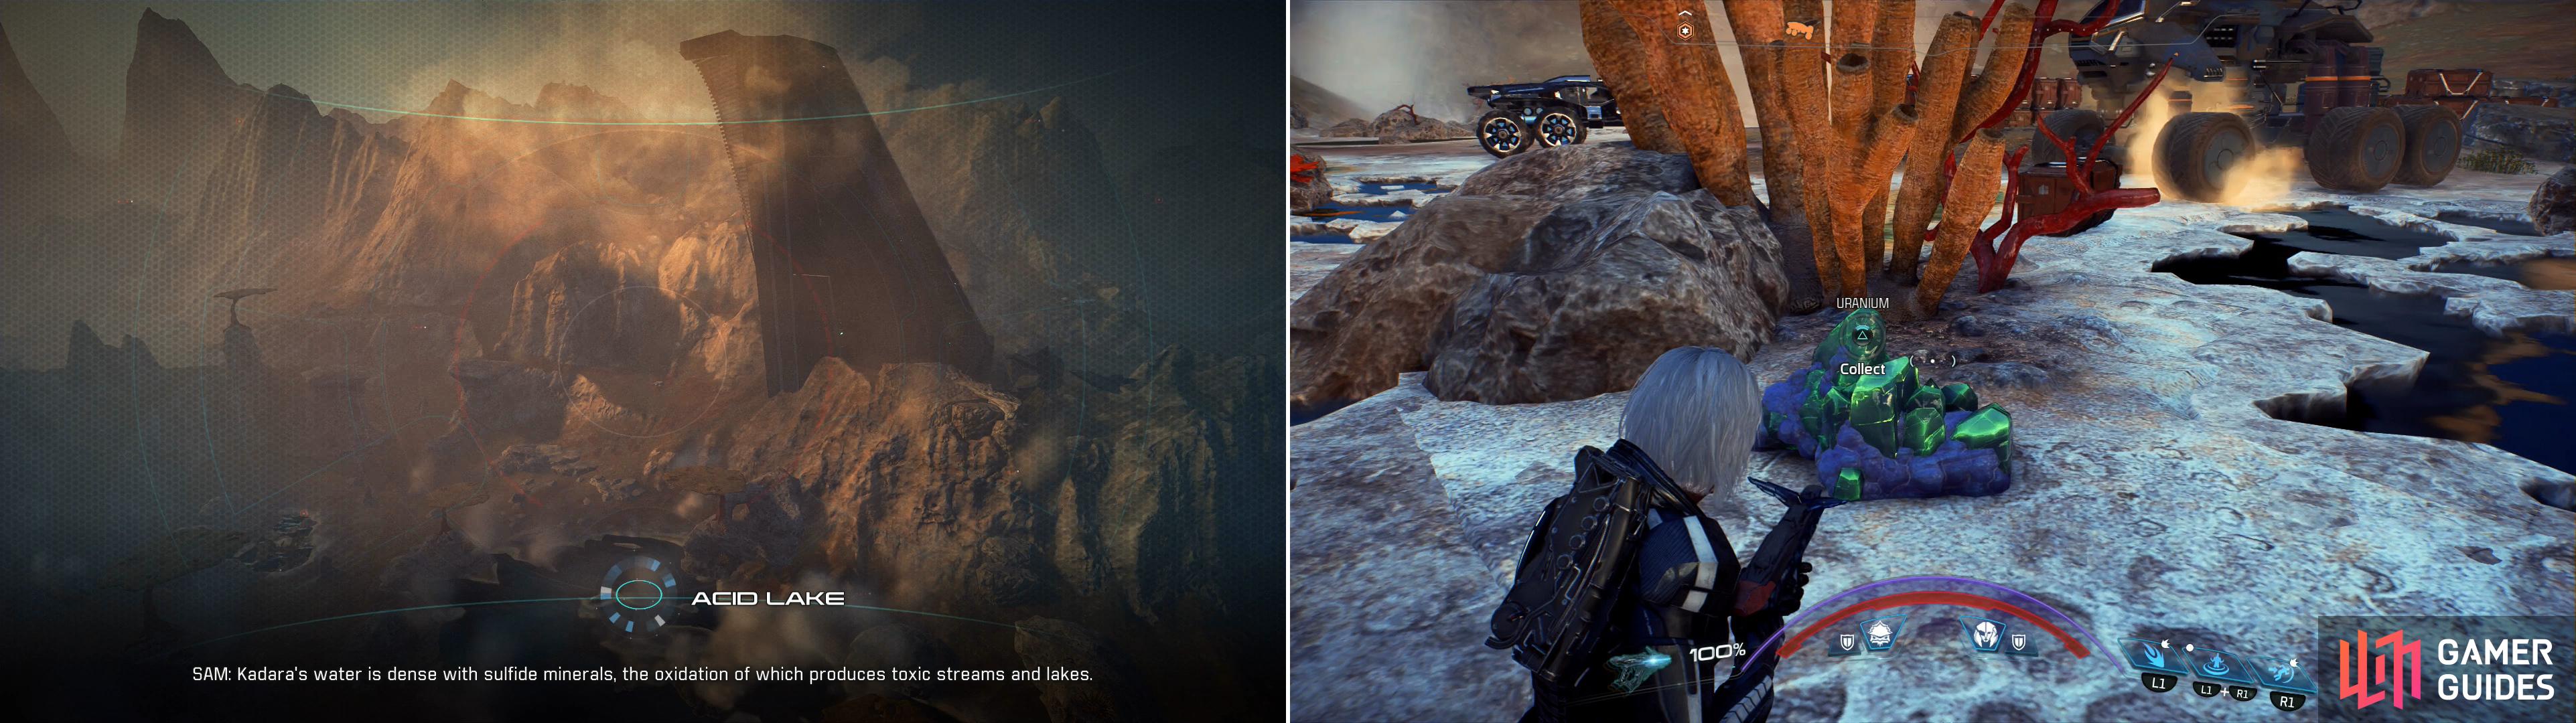 Heed SAMs advice - stay out of Kadaras water (left). As befitting such a toxic planet, nodes of Uranium and other minerals can be found on the surface (right).